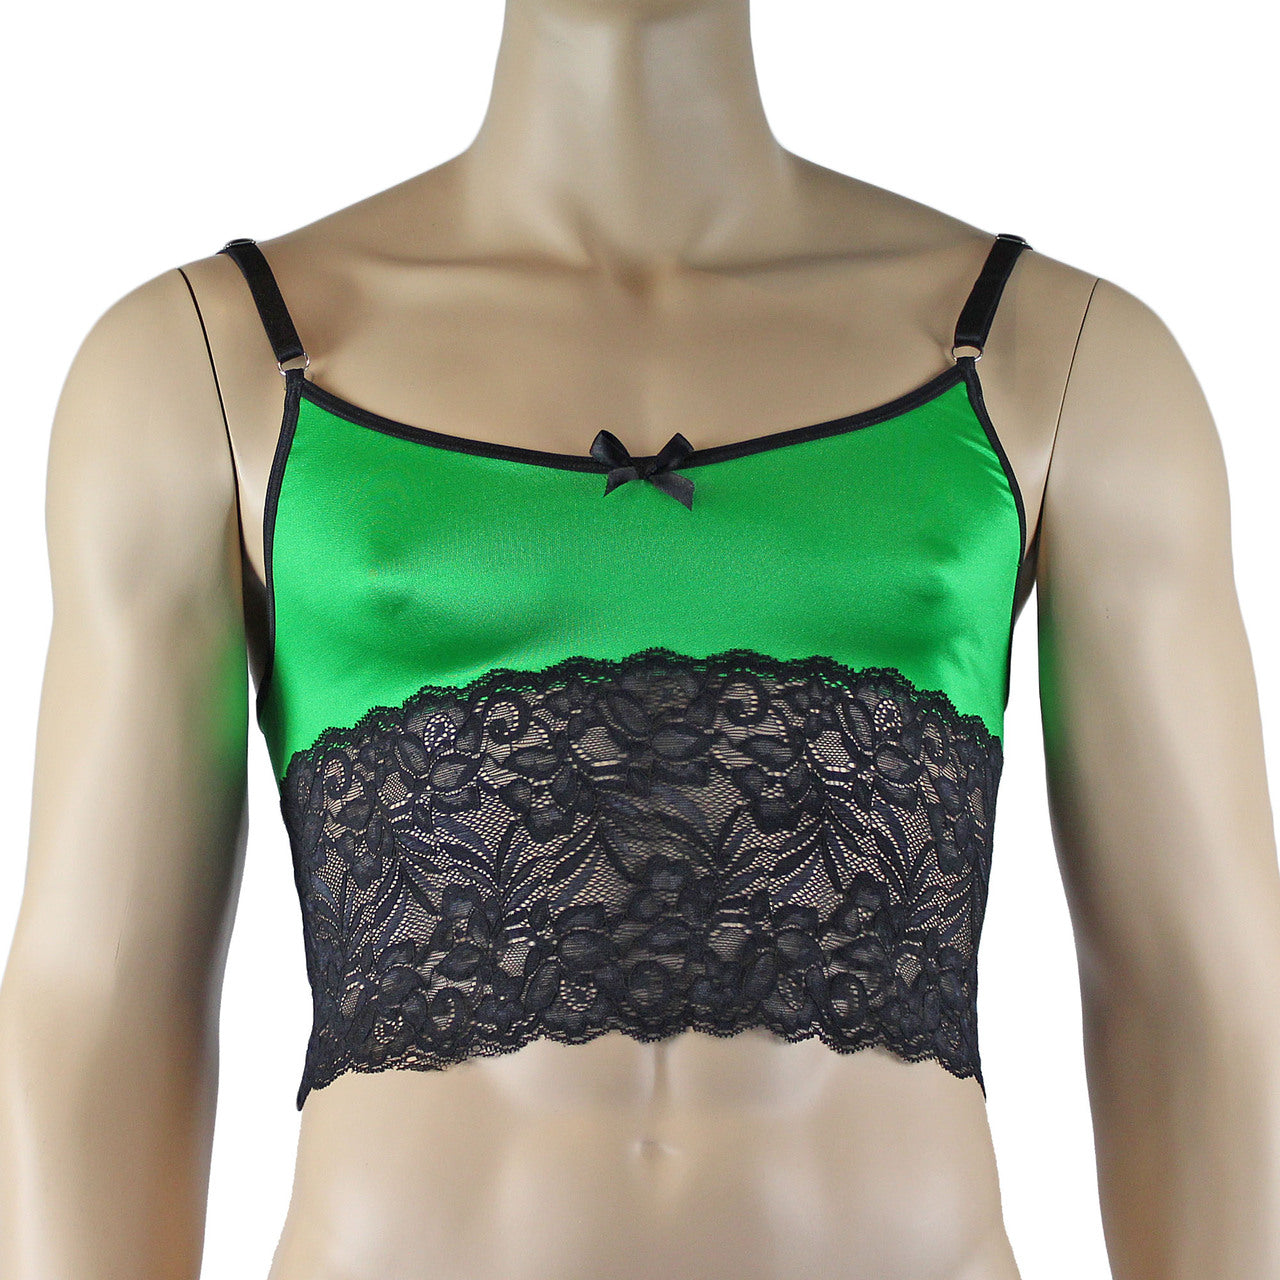 Mens Risque Camisole Top Boxer Briefs (green and black plus other colours)